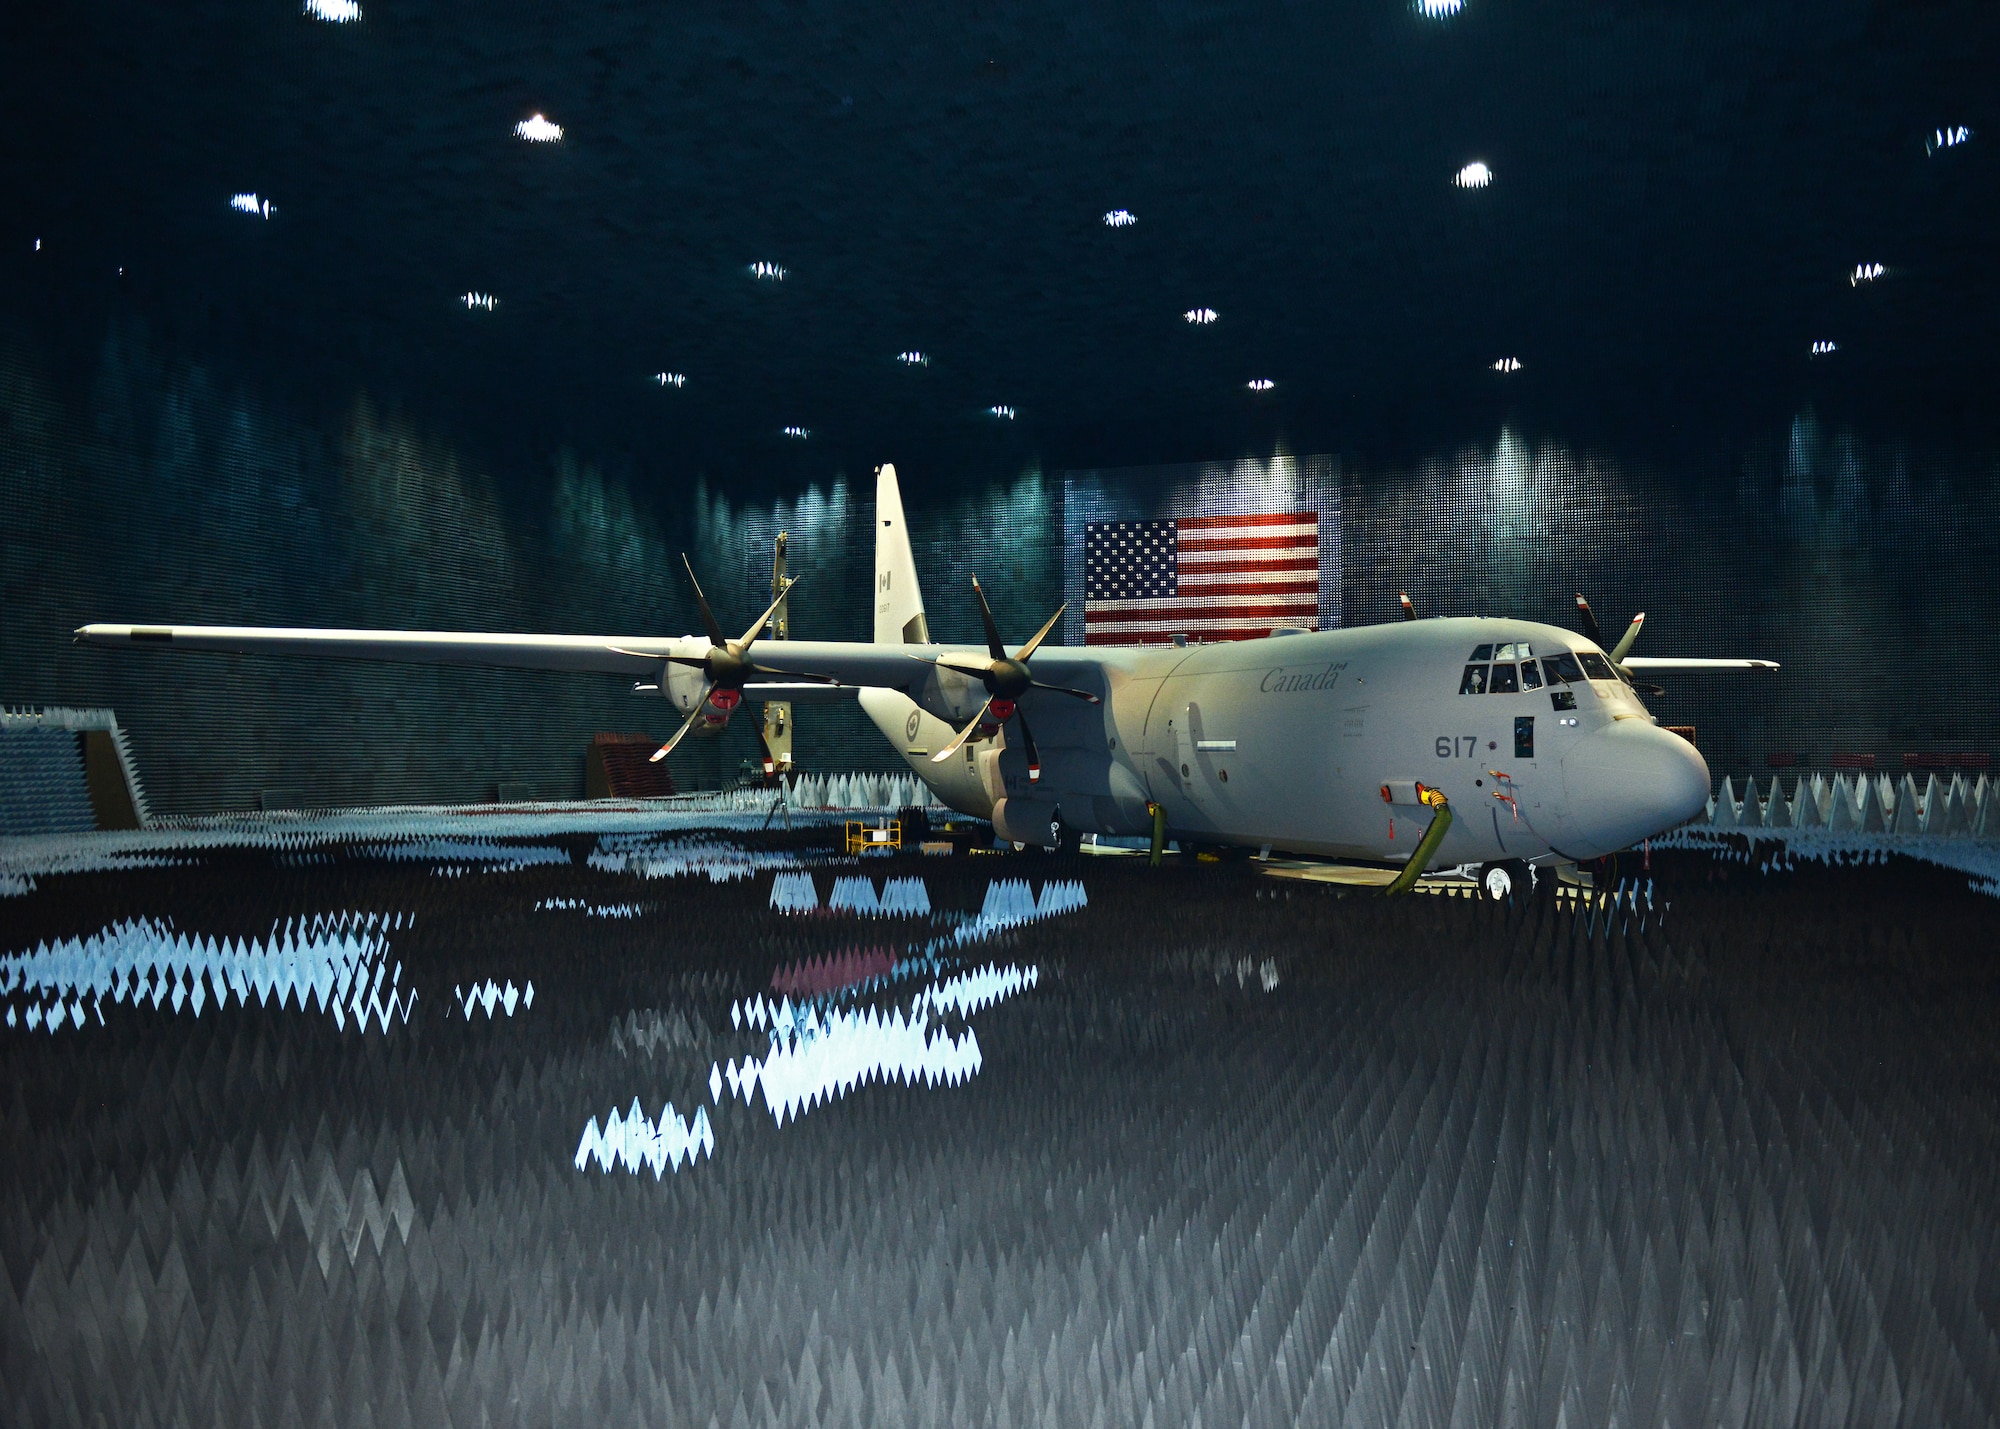 A Royal Canadian Air Force CC-130J transport plane sits in the Benefield Anechoic Facility undergoing electronic warfare testing. Canada purchased 17 CC-130Js with the last one delivered in 2012. This test program puts the CC-130J closer to full operational capability. (U.S. Air Force photo by Kenji Thuloweit)